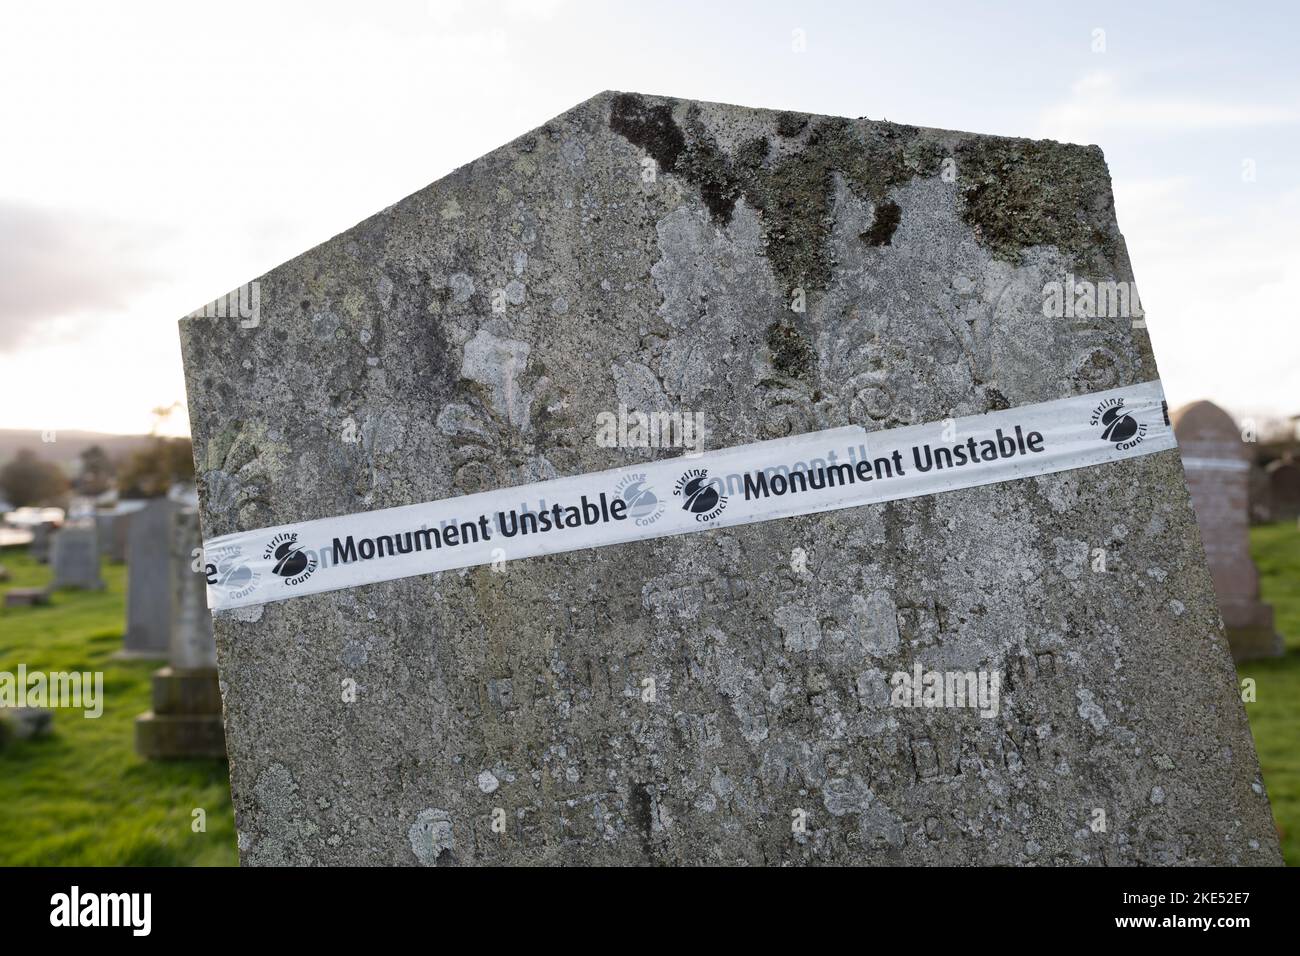 Monument Unstable Stirling Council tape wrapped around unsafe headstone in churchyard, Killearn, Stirling, Scotland, UK Stock Photo